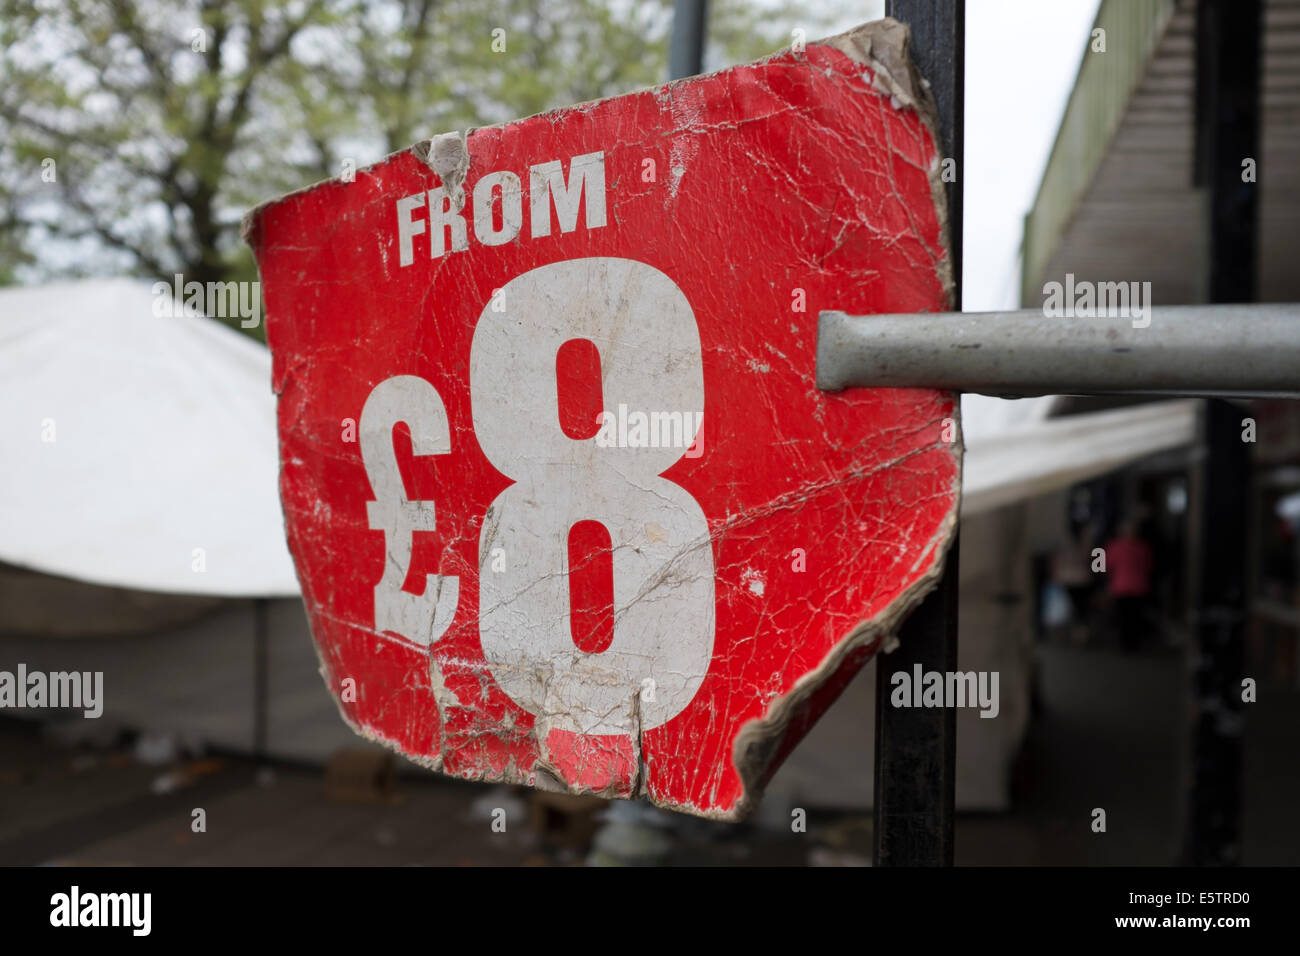 market Stall price sign from £ 8 old tatty worn Stock Photo